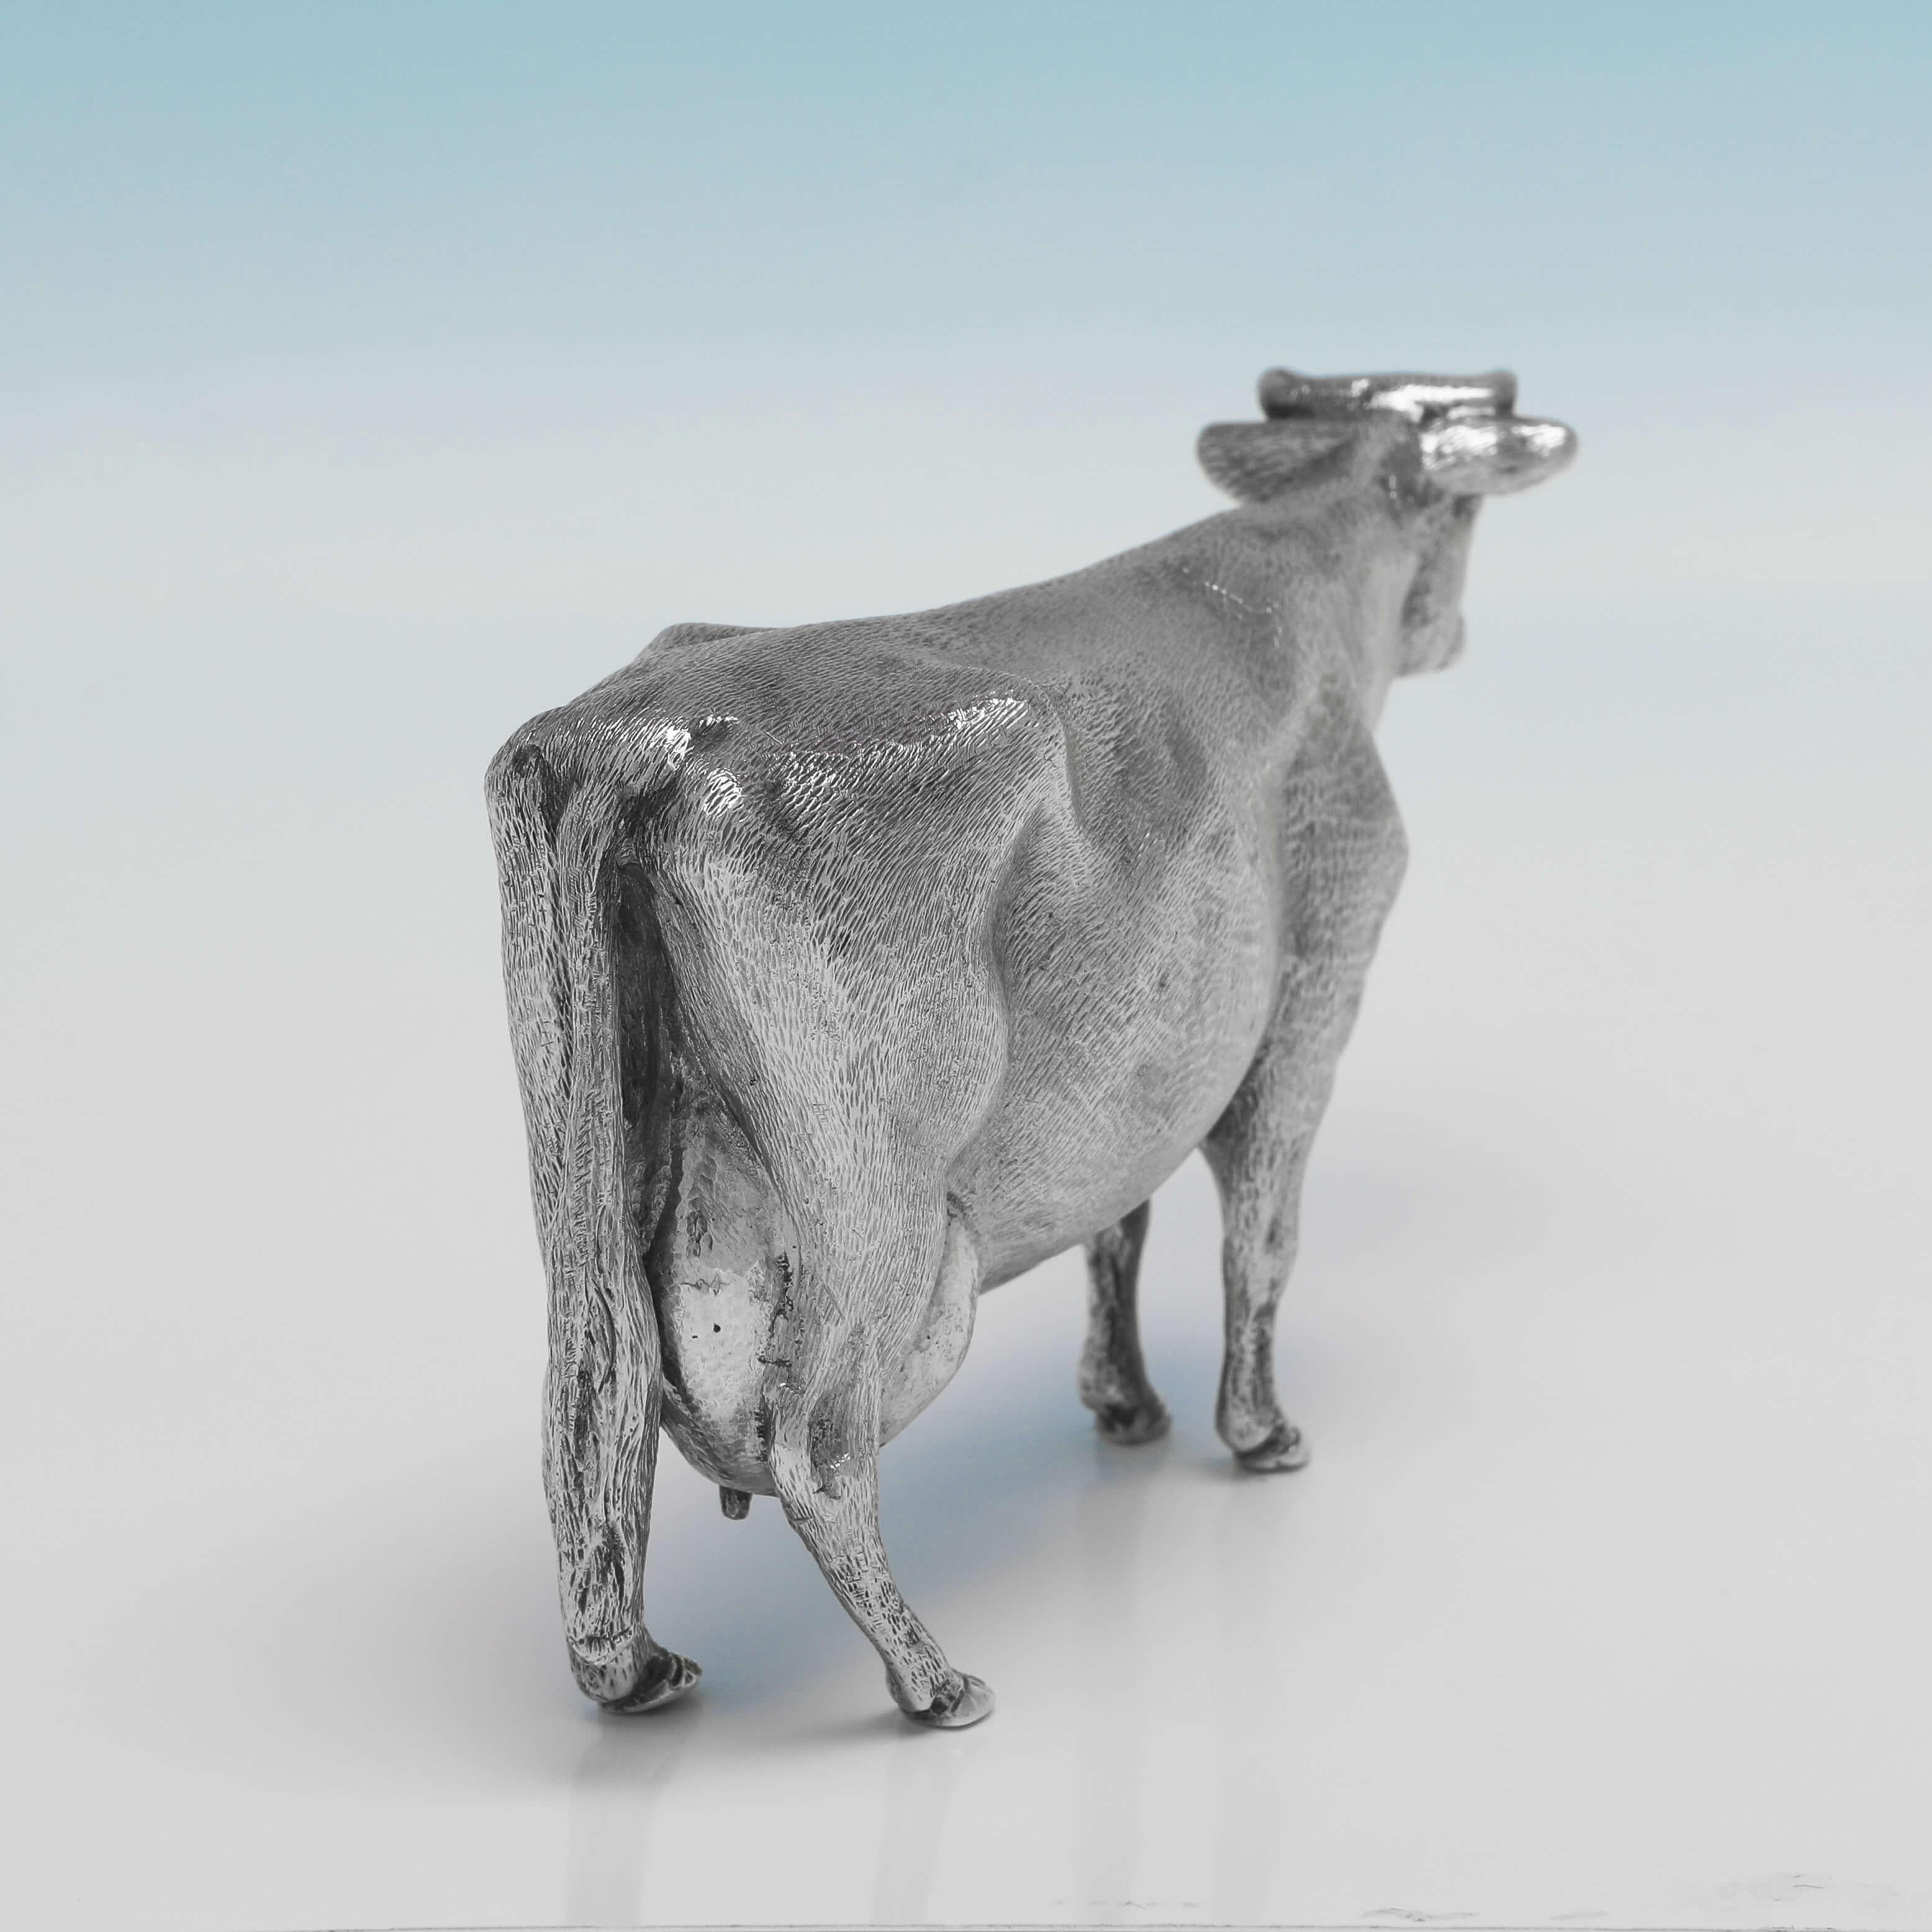 Hallmarked in London in 1973, this charming, Sterling Silver Model of a Cow, is realistically cast and hand finished. 

The cow measures 2.75